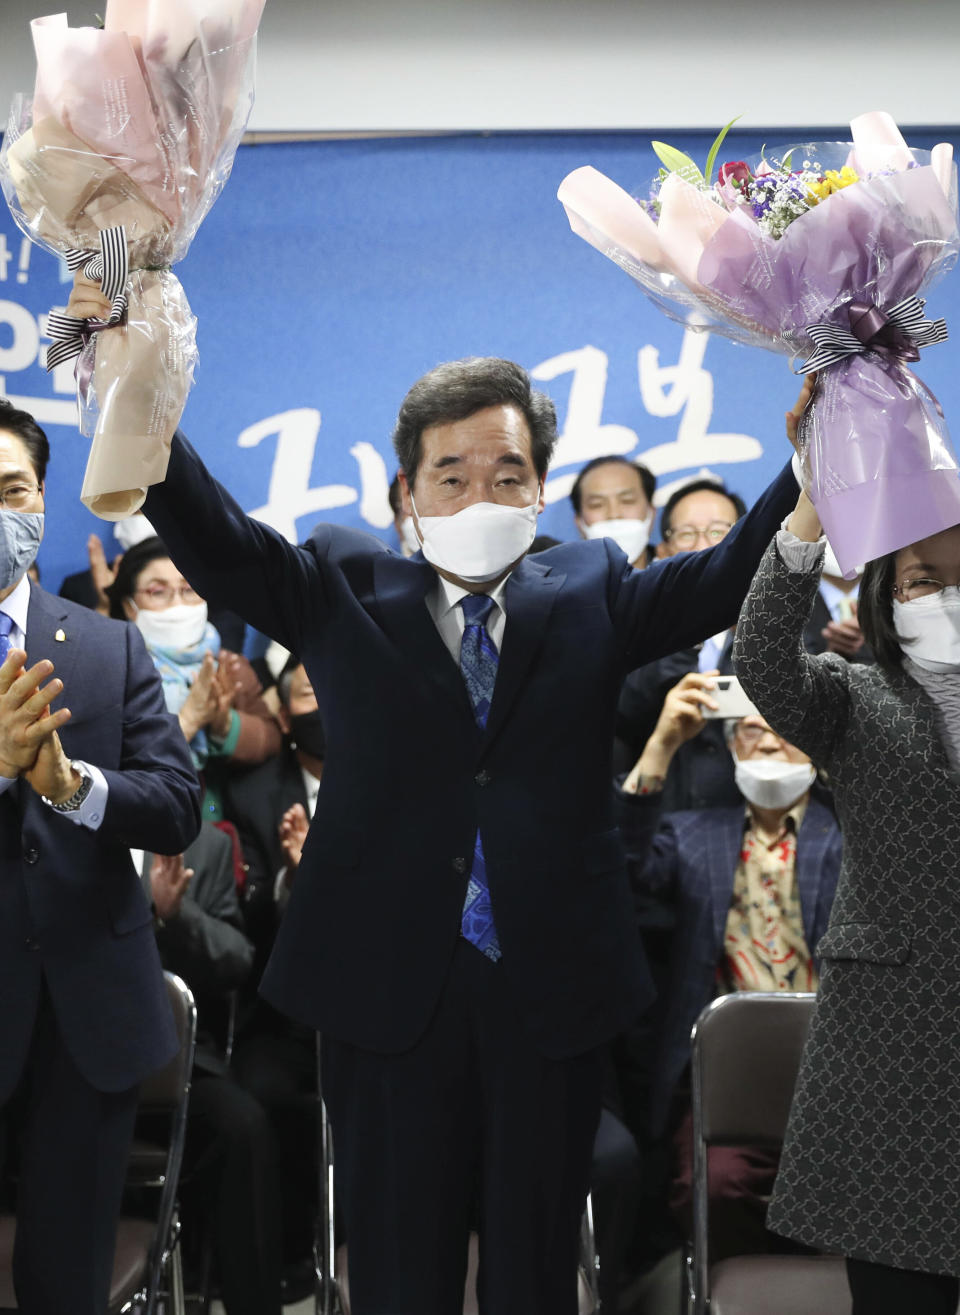 Lee Nak-yon, a former prime minister and candidate of the ruling Democratic Party, holds his hands with flowers after the parliamentary election in Seoul, South Korea, Wednesday, April 15, 2020. South Korean voters wore masks and moved slowly between lines of tape at polling stations on Wednesday to elect lawmakers in the shadows of the spreading coronavirus. (Hong Hae-in/Yonhap via AP)